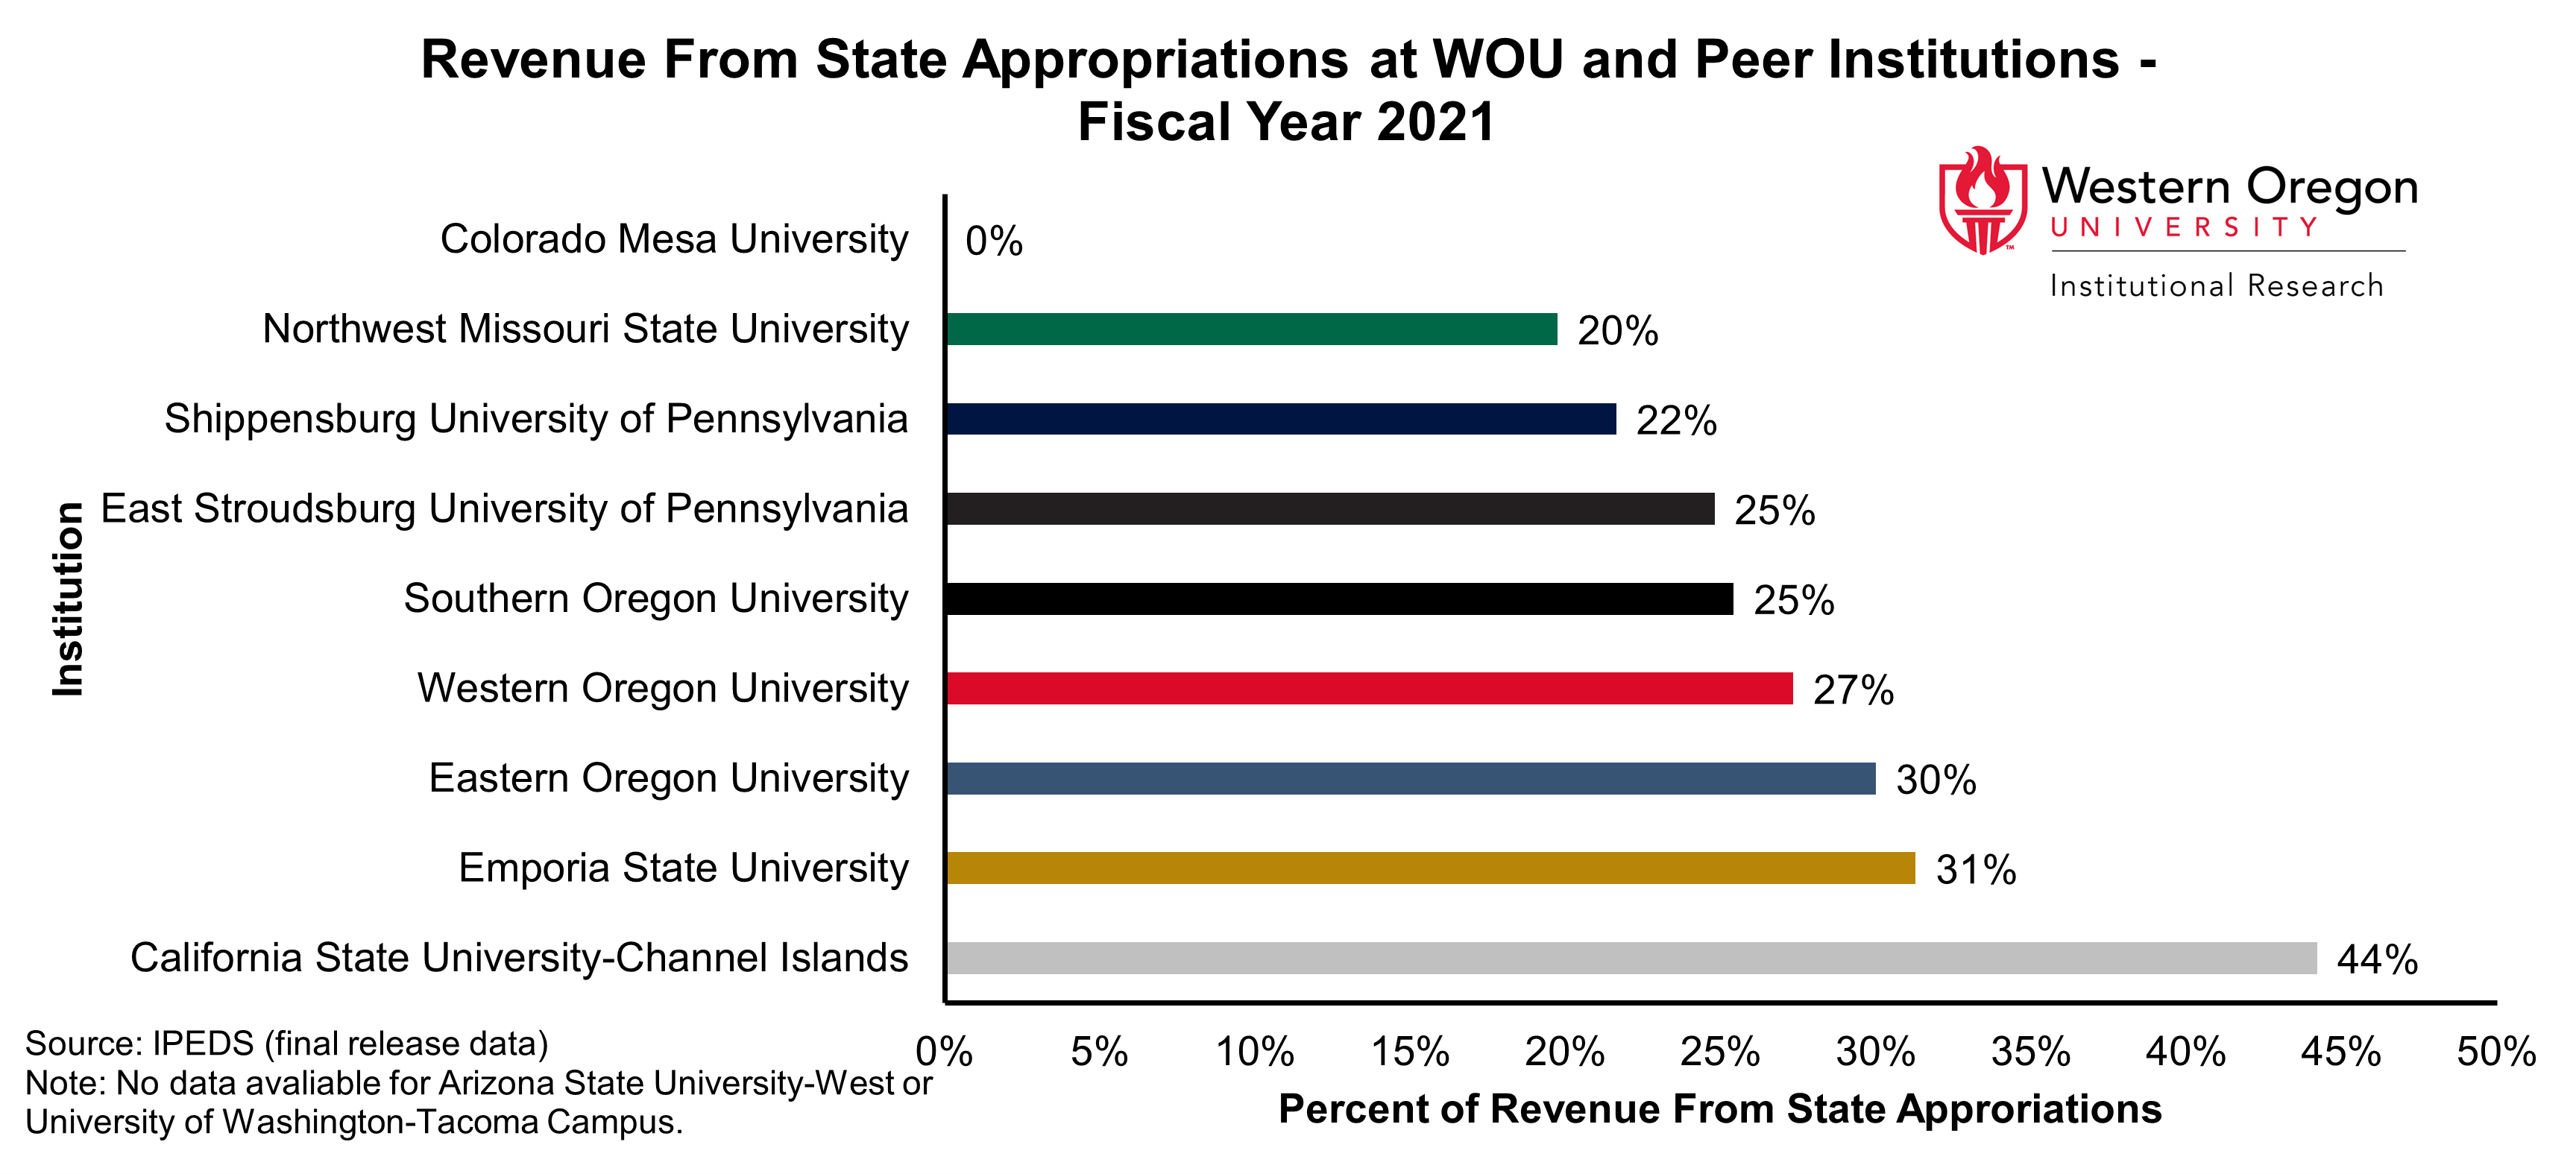 Bar graph of the percentage of revenue from state appropriations for WOU and peer universities in 2021, showing percentages that range from 0% to 44% with WOU's percentage falling a little above the median